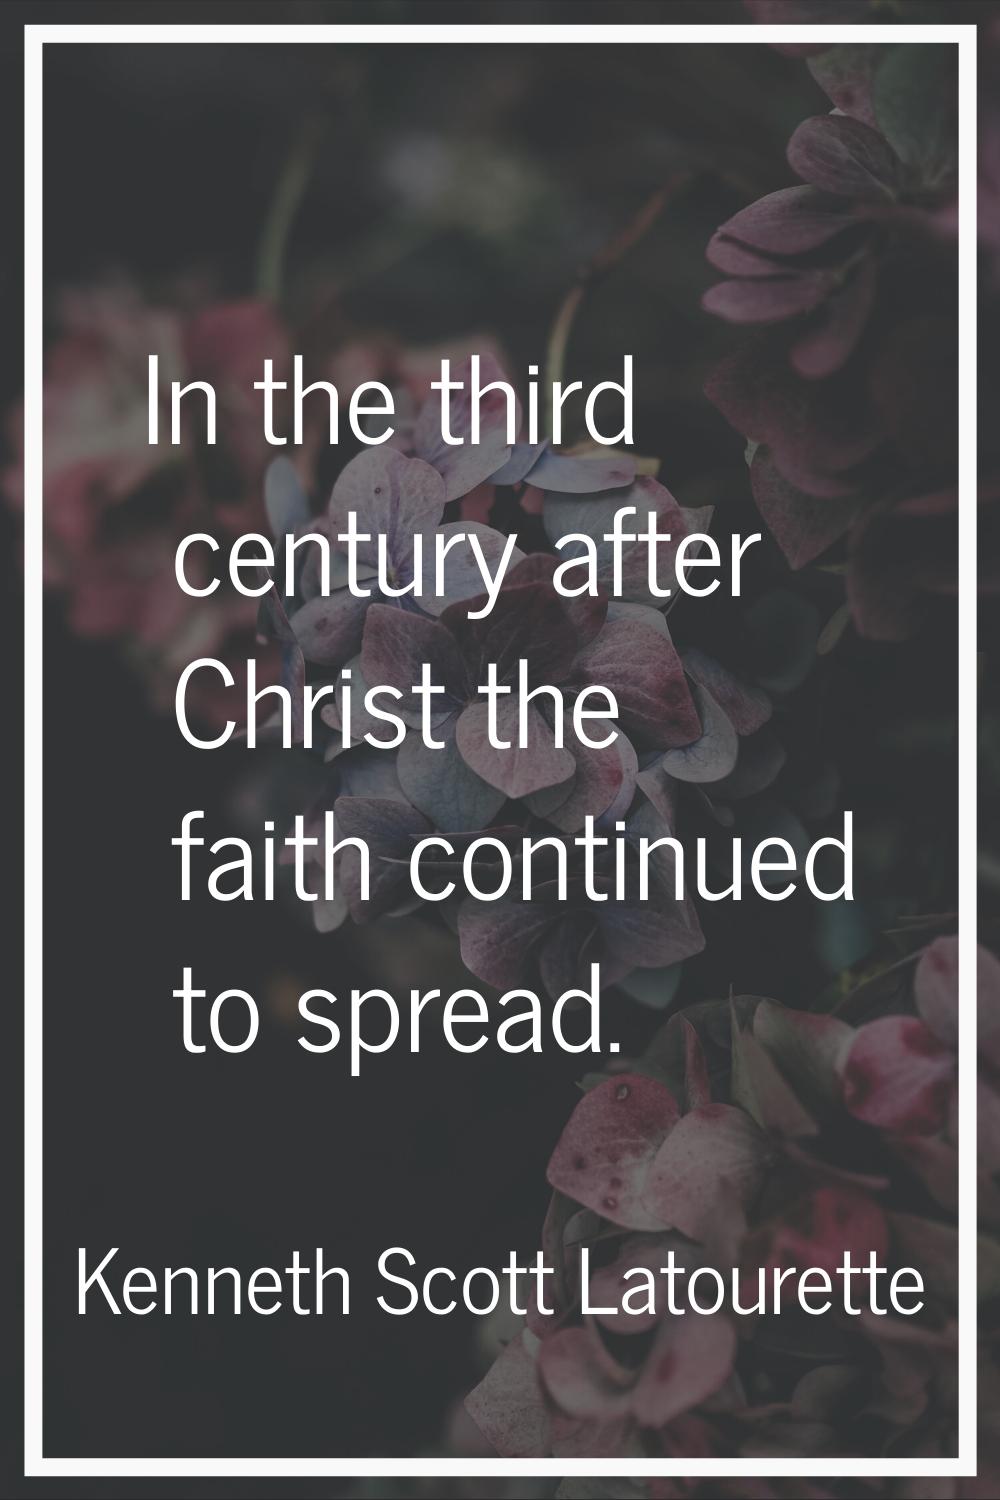 In the third century after Christ the faith continued to spread.